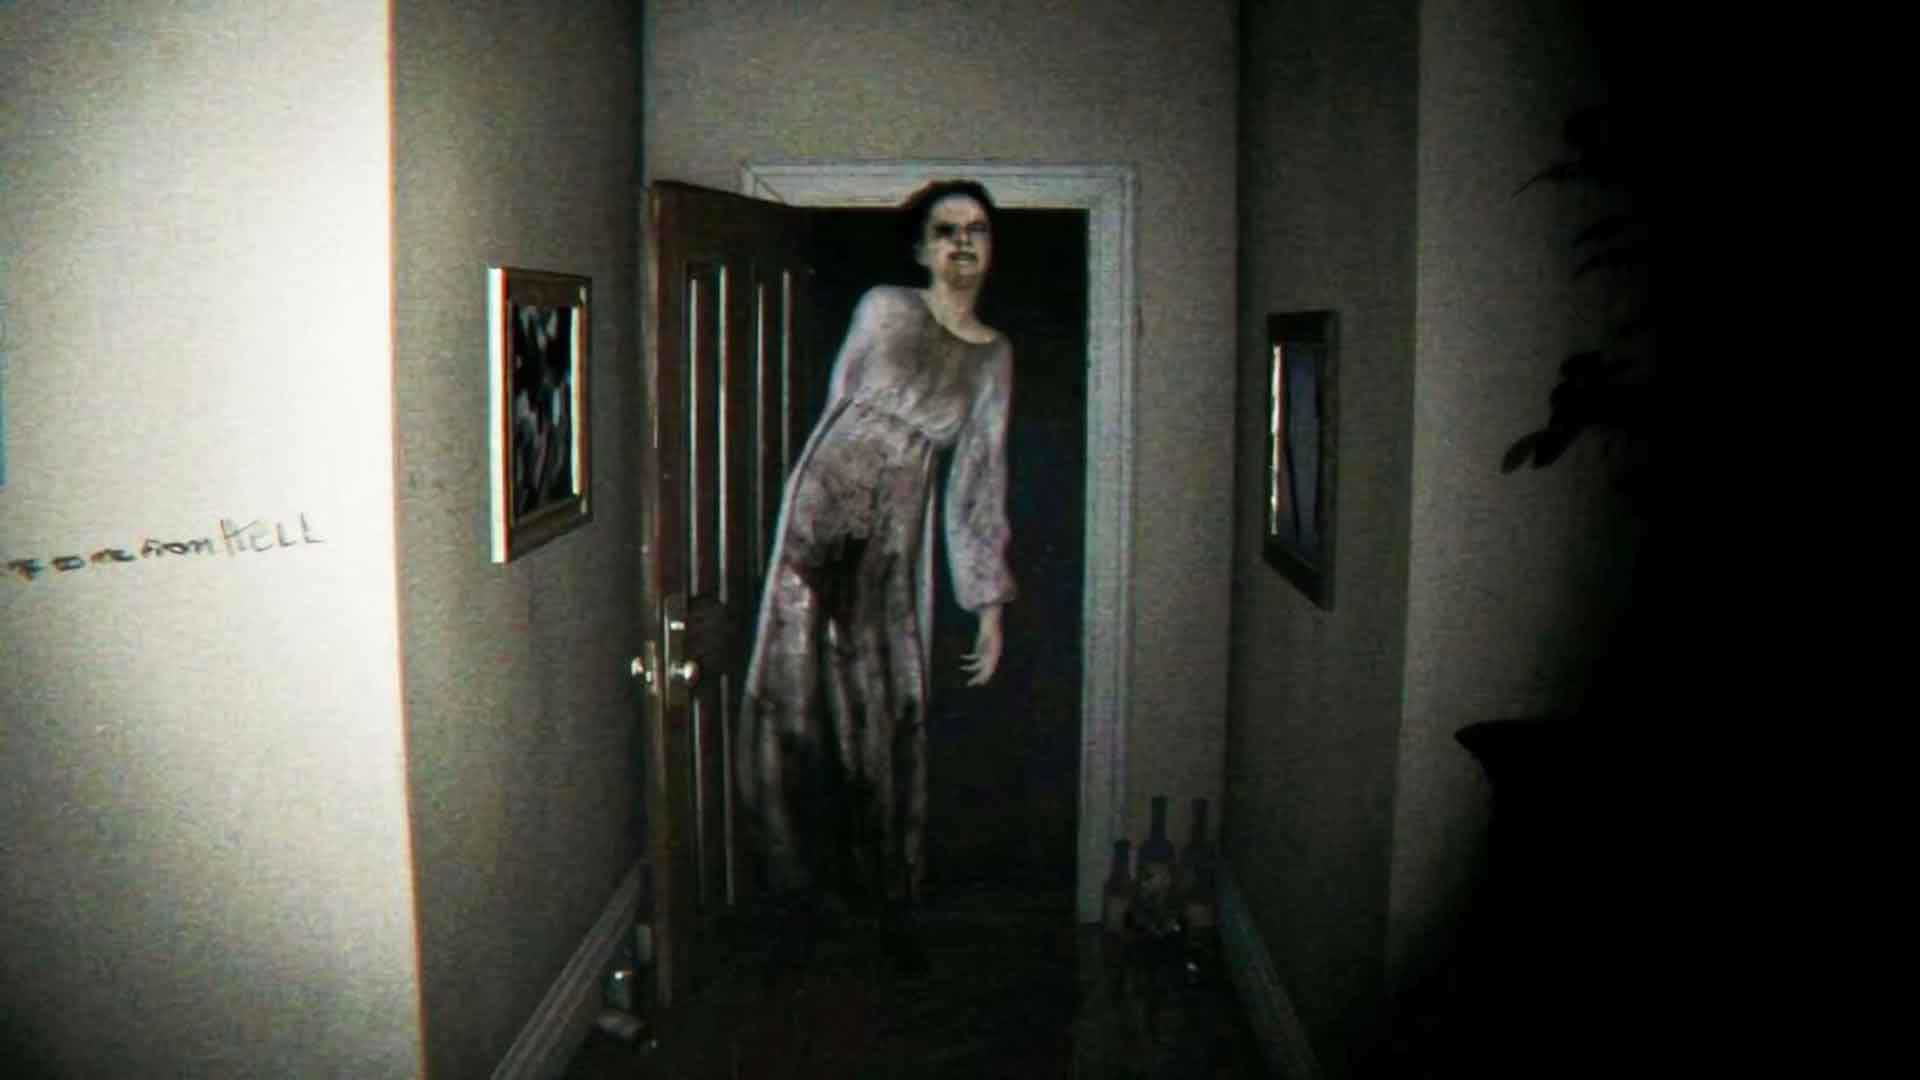 Upcoming Silent Hill games re-dated - Rely on Horror